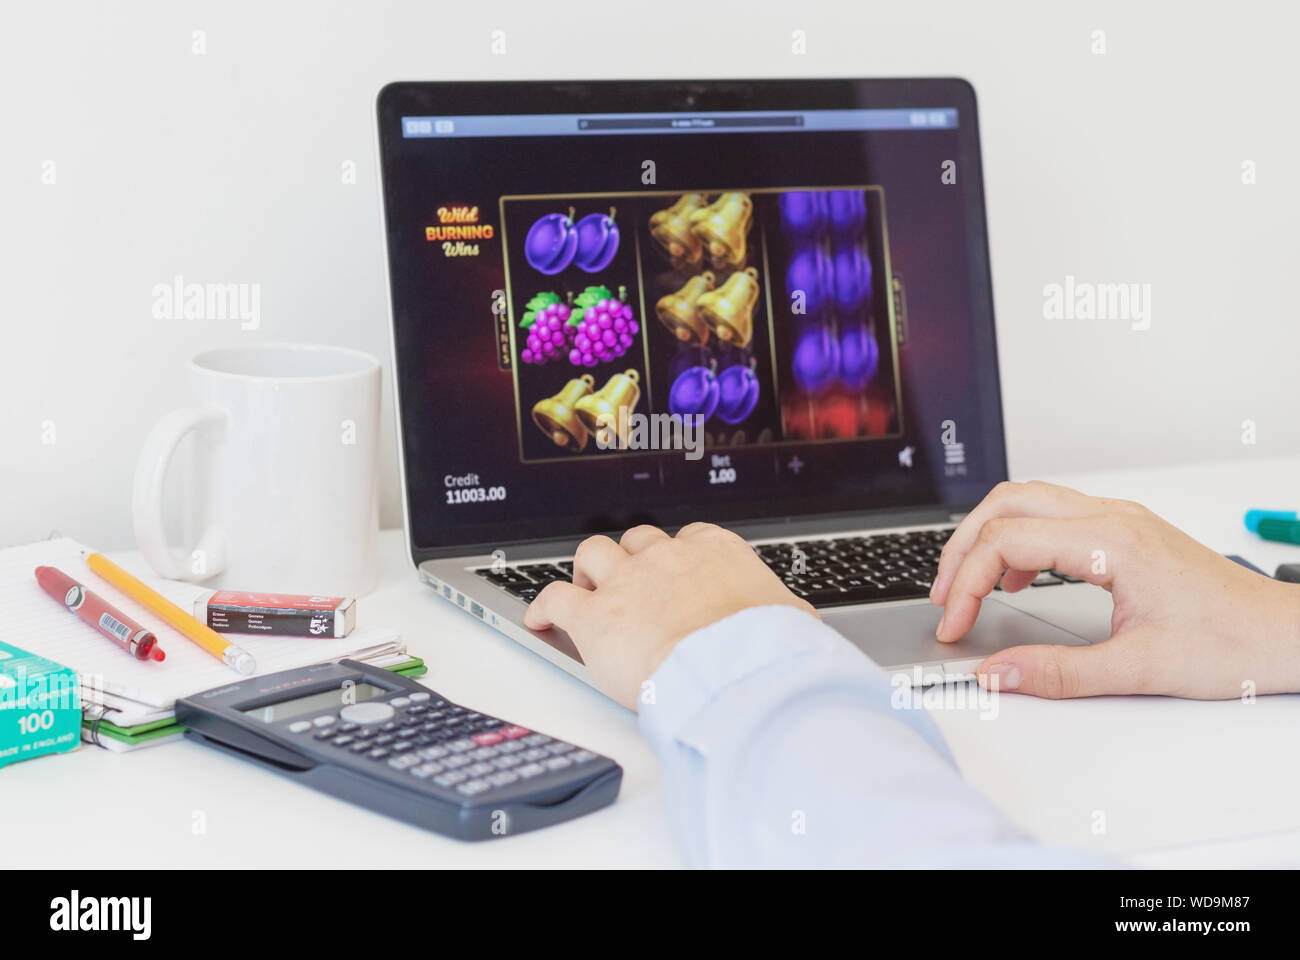 London / UK, August 24th 2019 - Employee online gambling at work, playing a fruit slot machine on a laptop computer. Closeup with a shallow depth of f Stock Photo